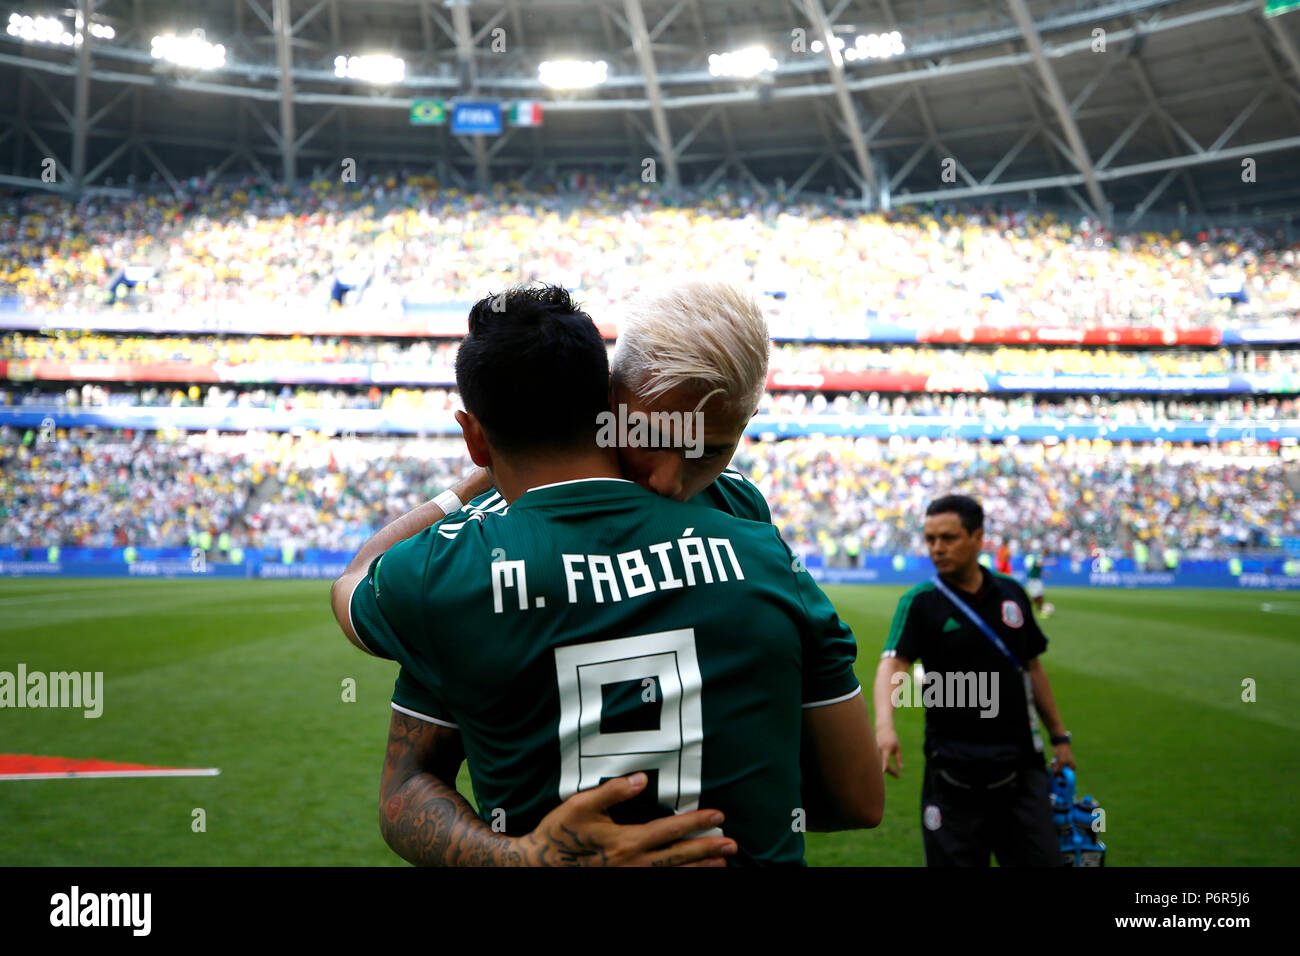 SAMARA, SA - 02.07.2018: BRAZIL VS. MEXICO - Marco FABIAN of Mexico and Carlos SALCEDO during the match between Brazil and Mexico, valid for the eighth round of the 2018 World Cup held at the Samara Arena in Samara, Russia. (Photo: Rodolfo Buhrer/La Imagem/Fotoarena) Stock Photo